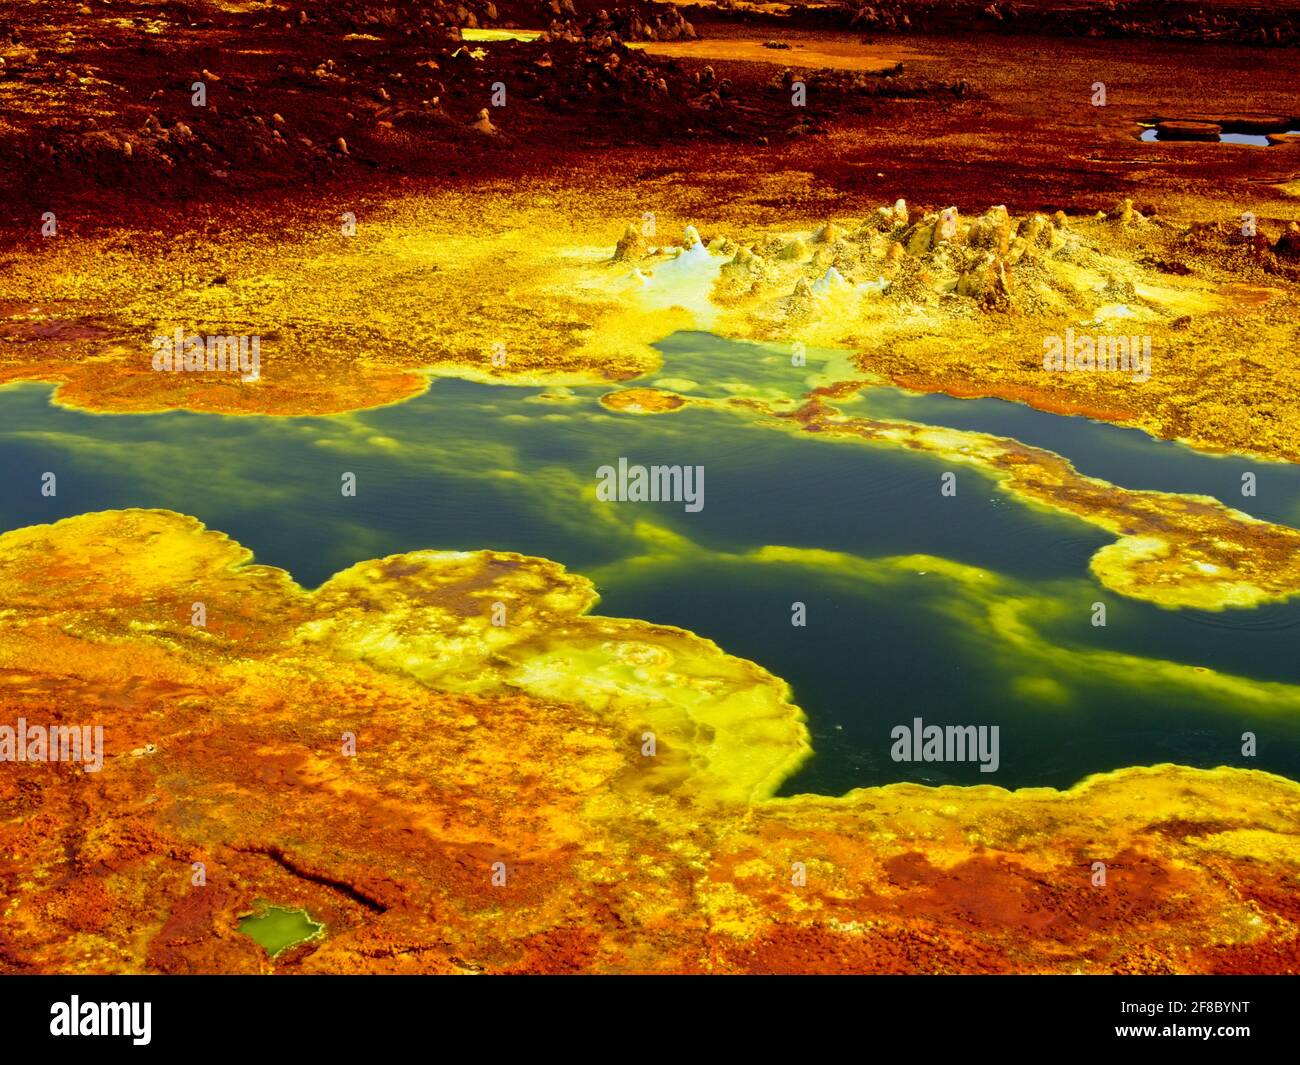 Danakil Depression  landscape of surreal colors and Mars like landscape created by sulphur springs forming bright colors in the hottest place on earth Stock Photo